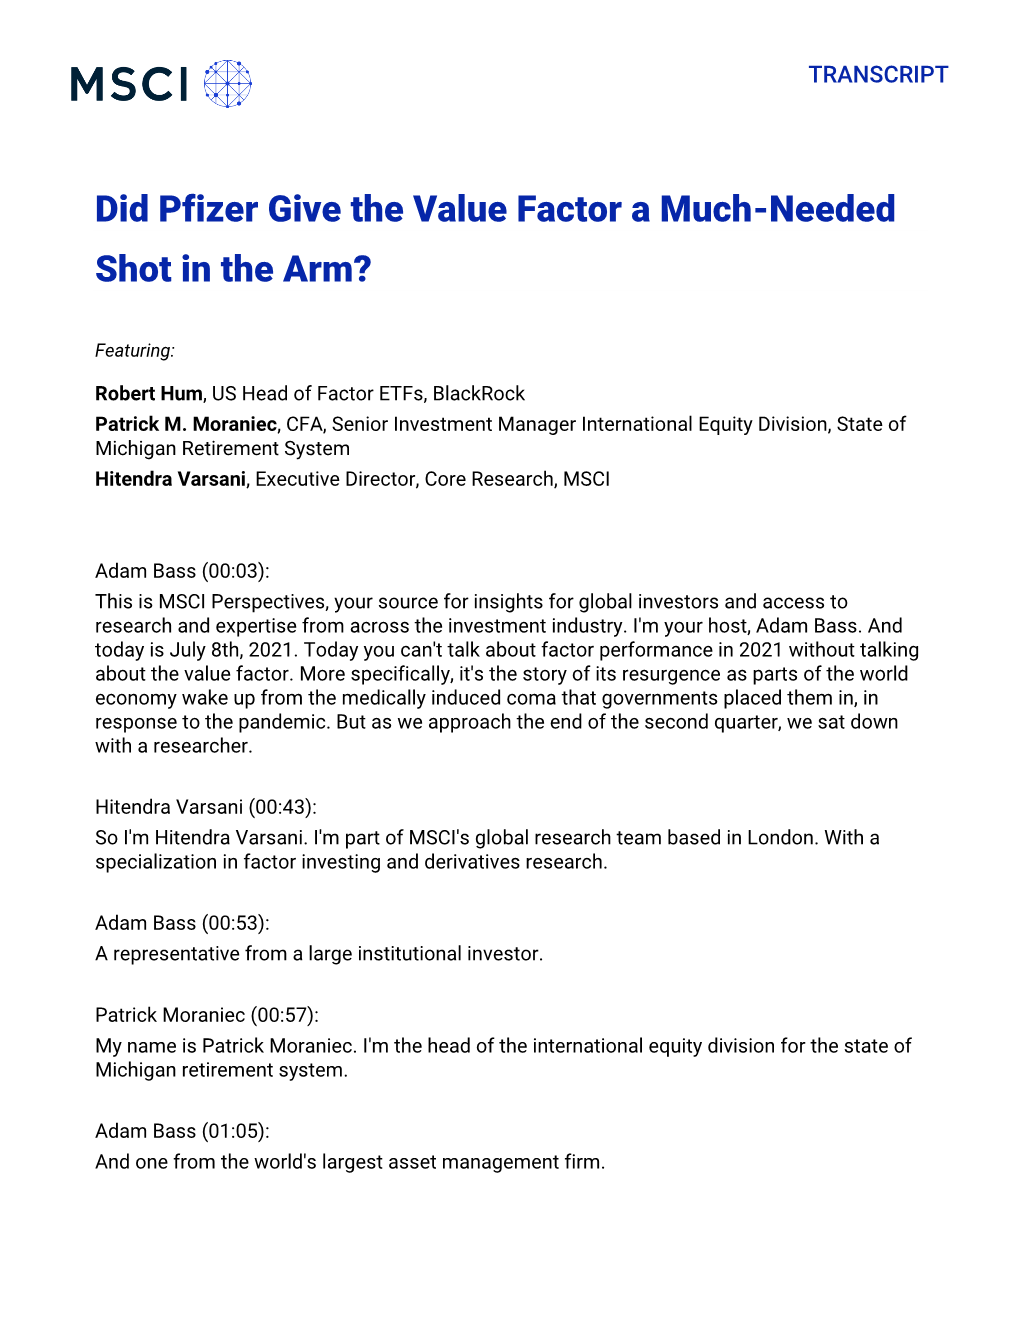 Did Pfizer Give the Value Factor a Much-Needed Shot in the Arm?